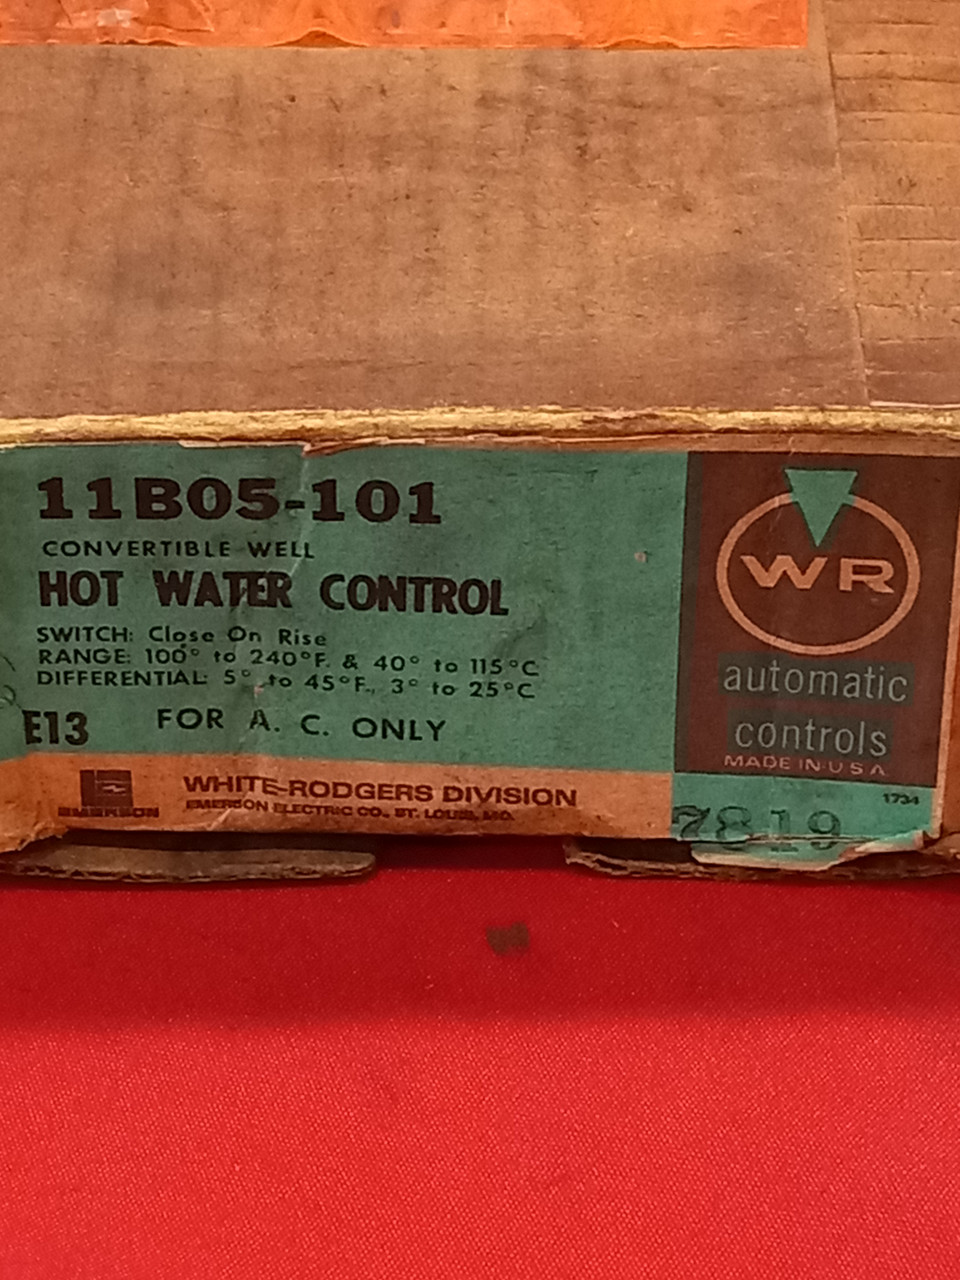 White-Rodgers 11B05-101 Convertible Well Hot Water Control